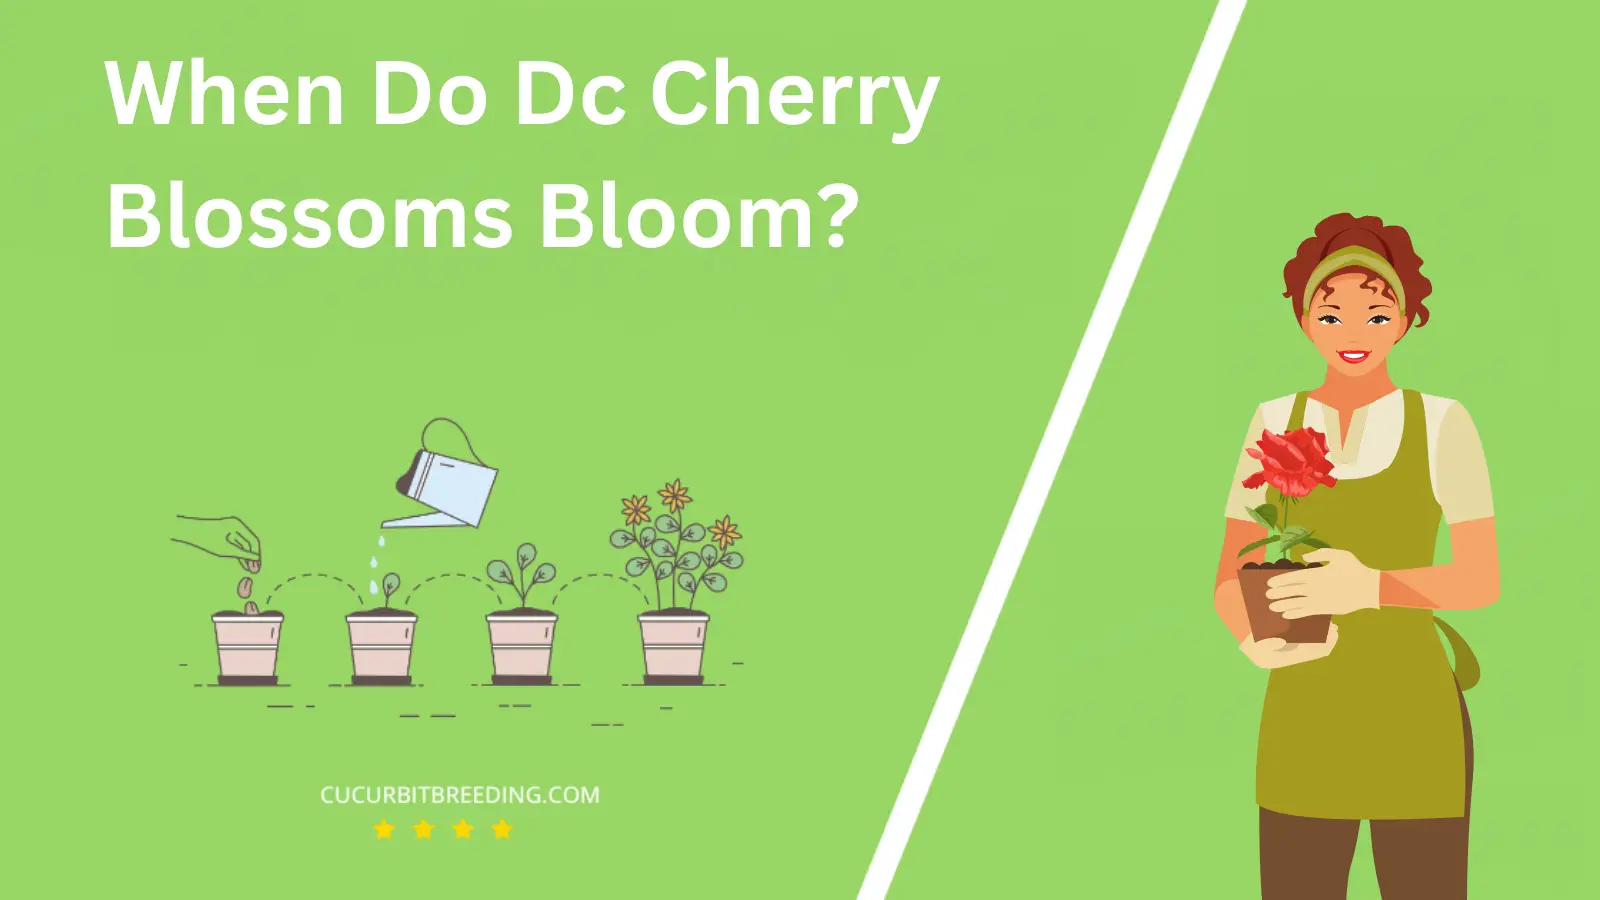 When Do Dc Cherry Blossoms Bloom?